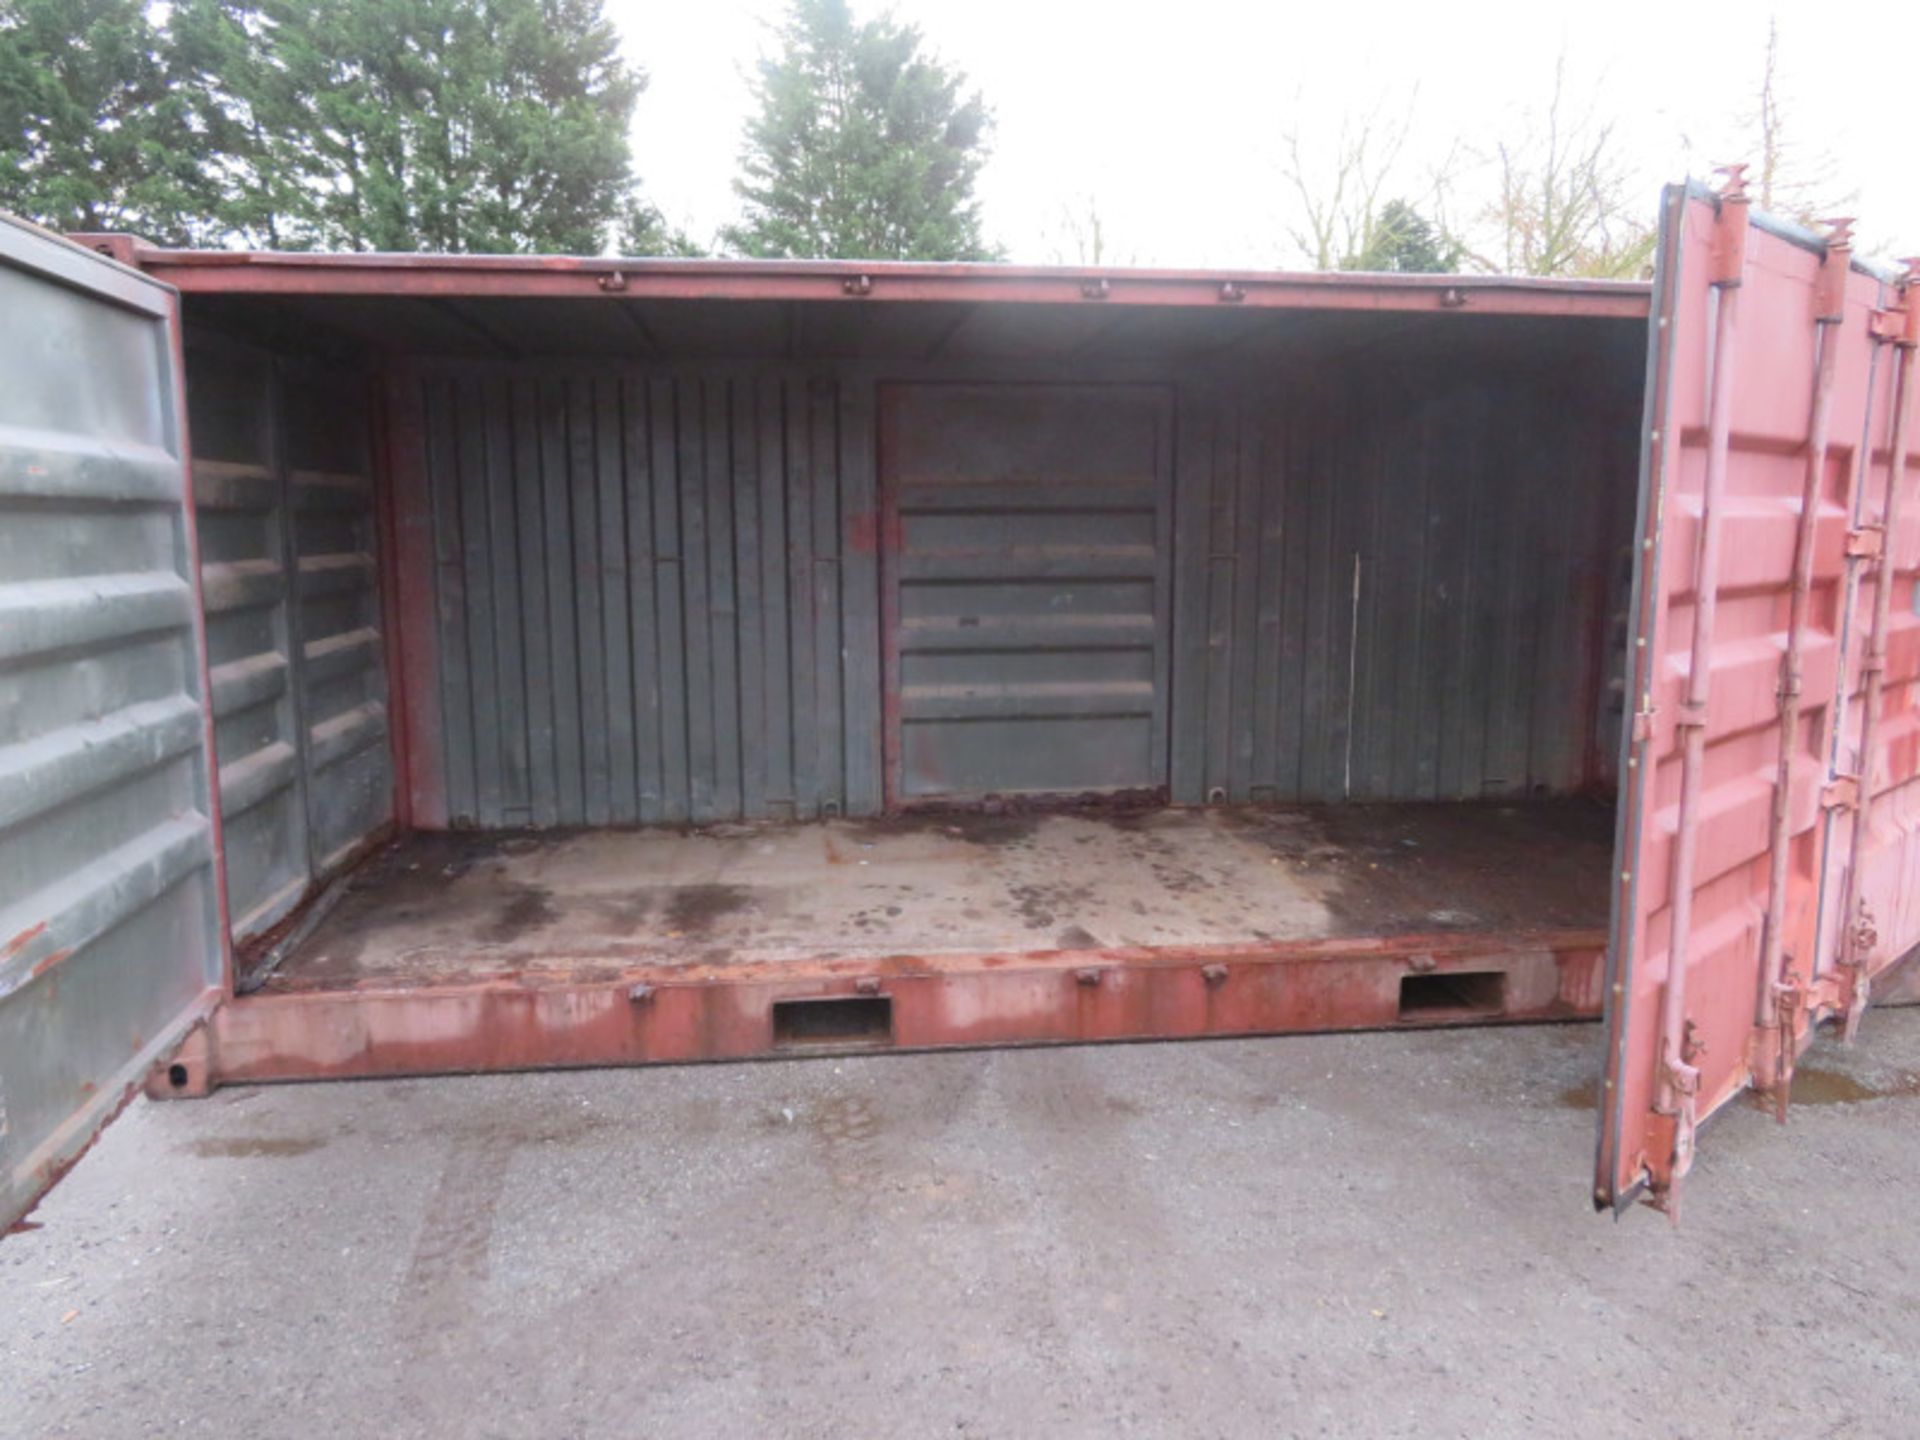 20ft Side and end opening Iso container - 8ft x 8ft x 20ft External Dimensions (Rust marks - Image 5 of 7